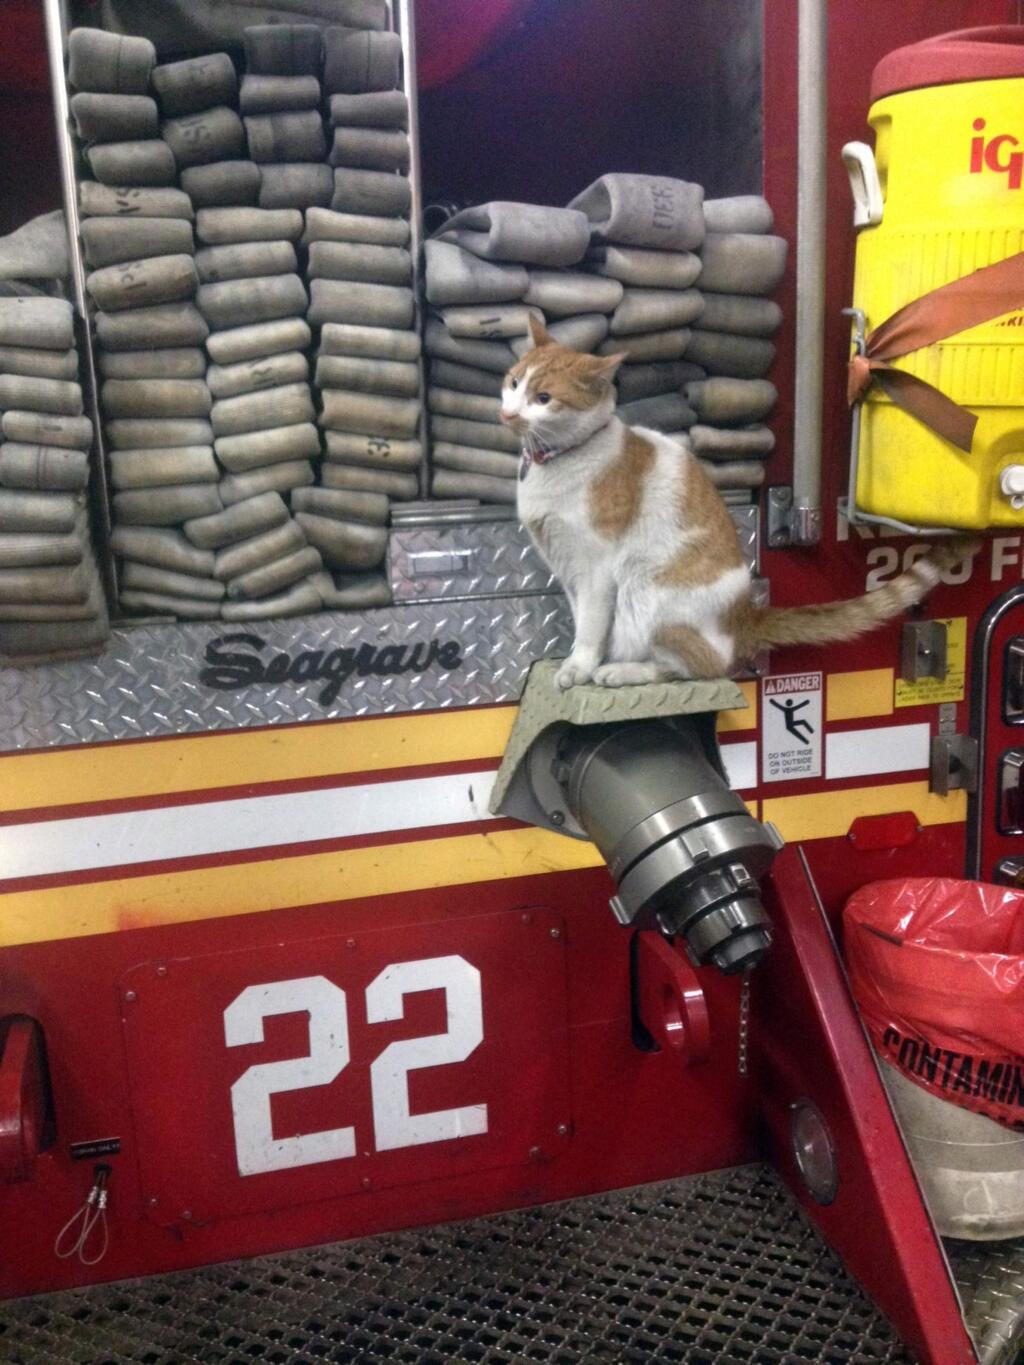 This photo provided by Lisa Rogak shows Carlow the cat perched on a fire truck in New York. Carlow was found by firefighters of Engine 22, Ladder 13 in upper Manhattan and became their official mascot. He is named him after a bar down the street. Carlow's job is one of 50 showcased in Lisa Rogak's new book titled 'Cats on the Job.' (Jessica Mikel Bertolini via AP)